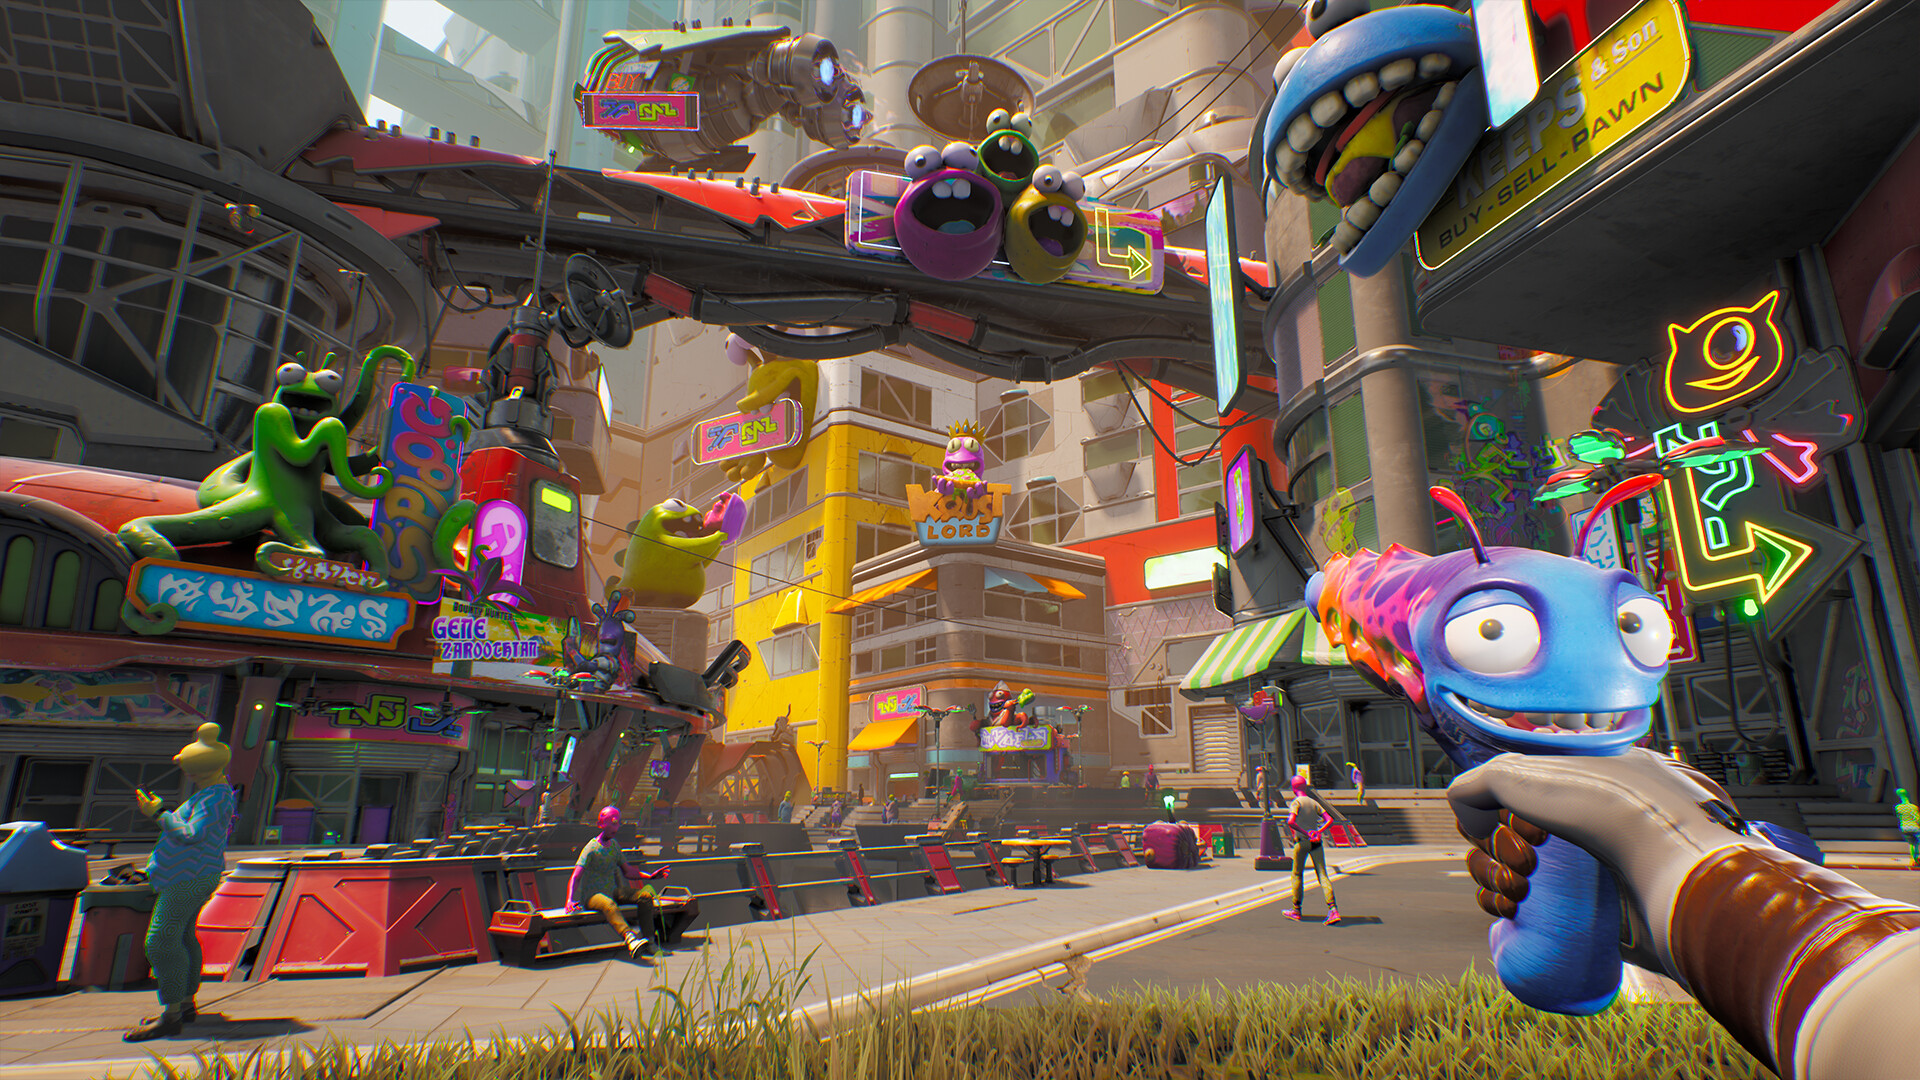 Gamescom Opening Night Live Reveals High on Life Trailer — Watch It Here